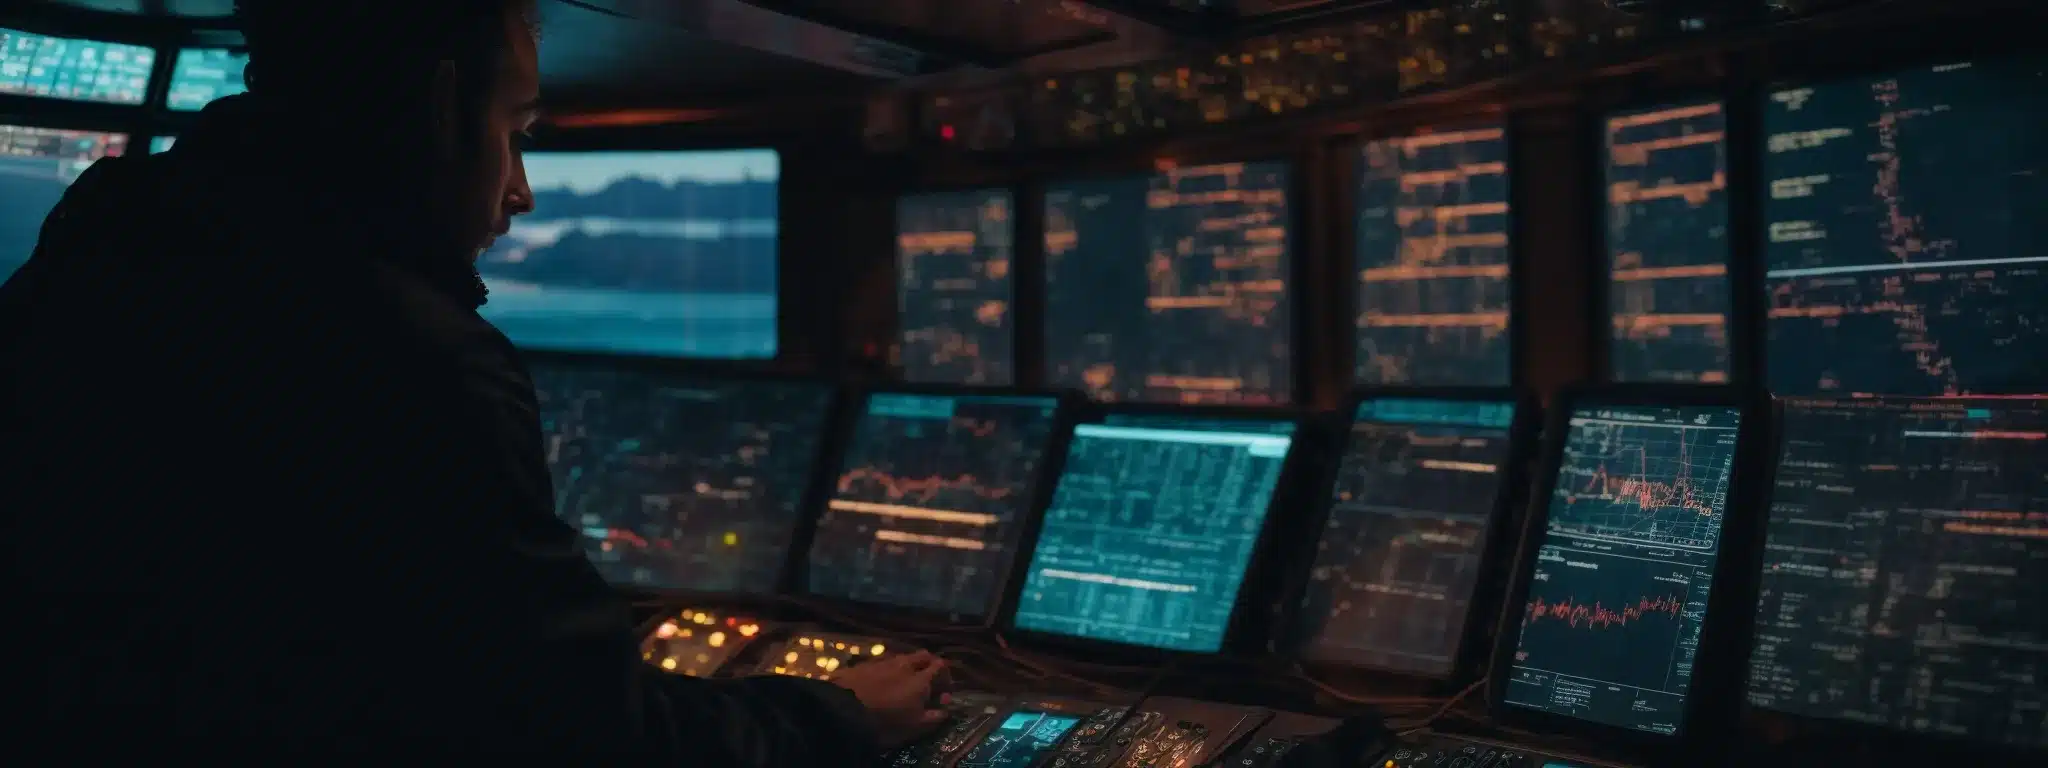 A Captain Stands At The Helm Of His Ship, Eyes Fixed On A High-Tech Navigation Panel Ablaze With Colorful Data Charts.